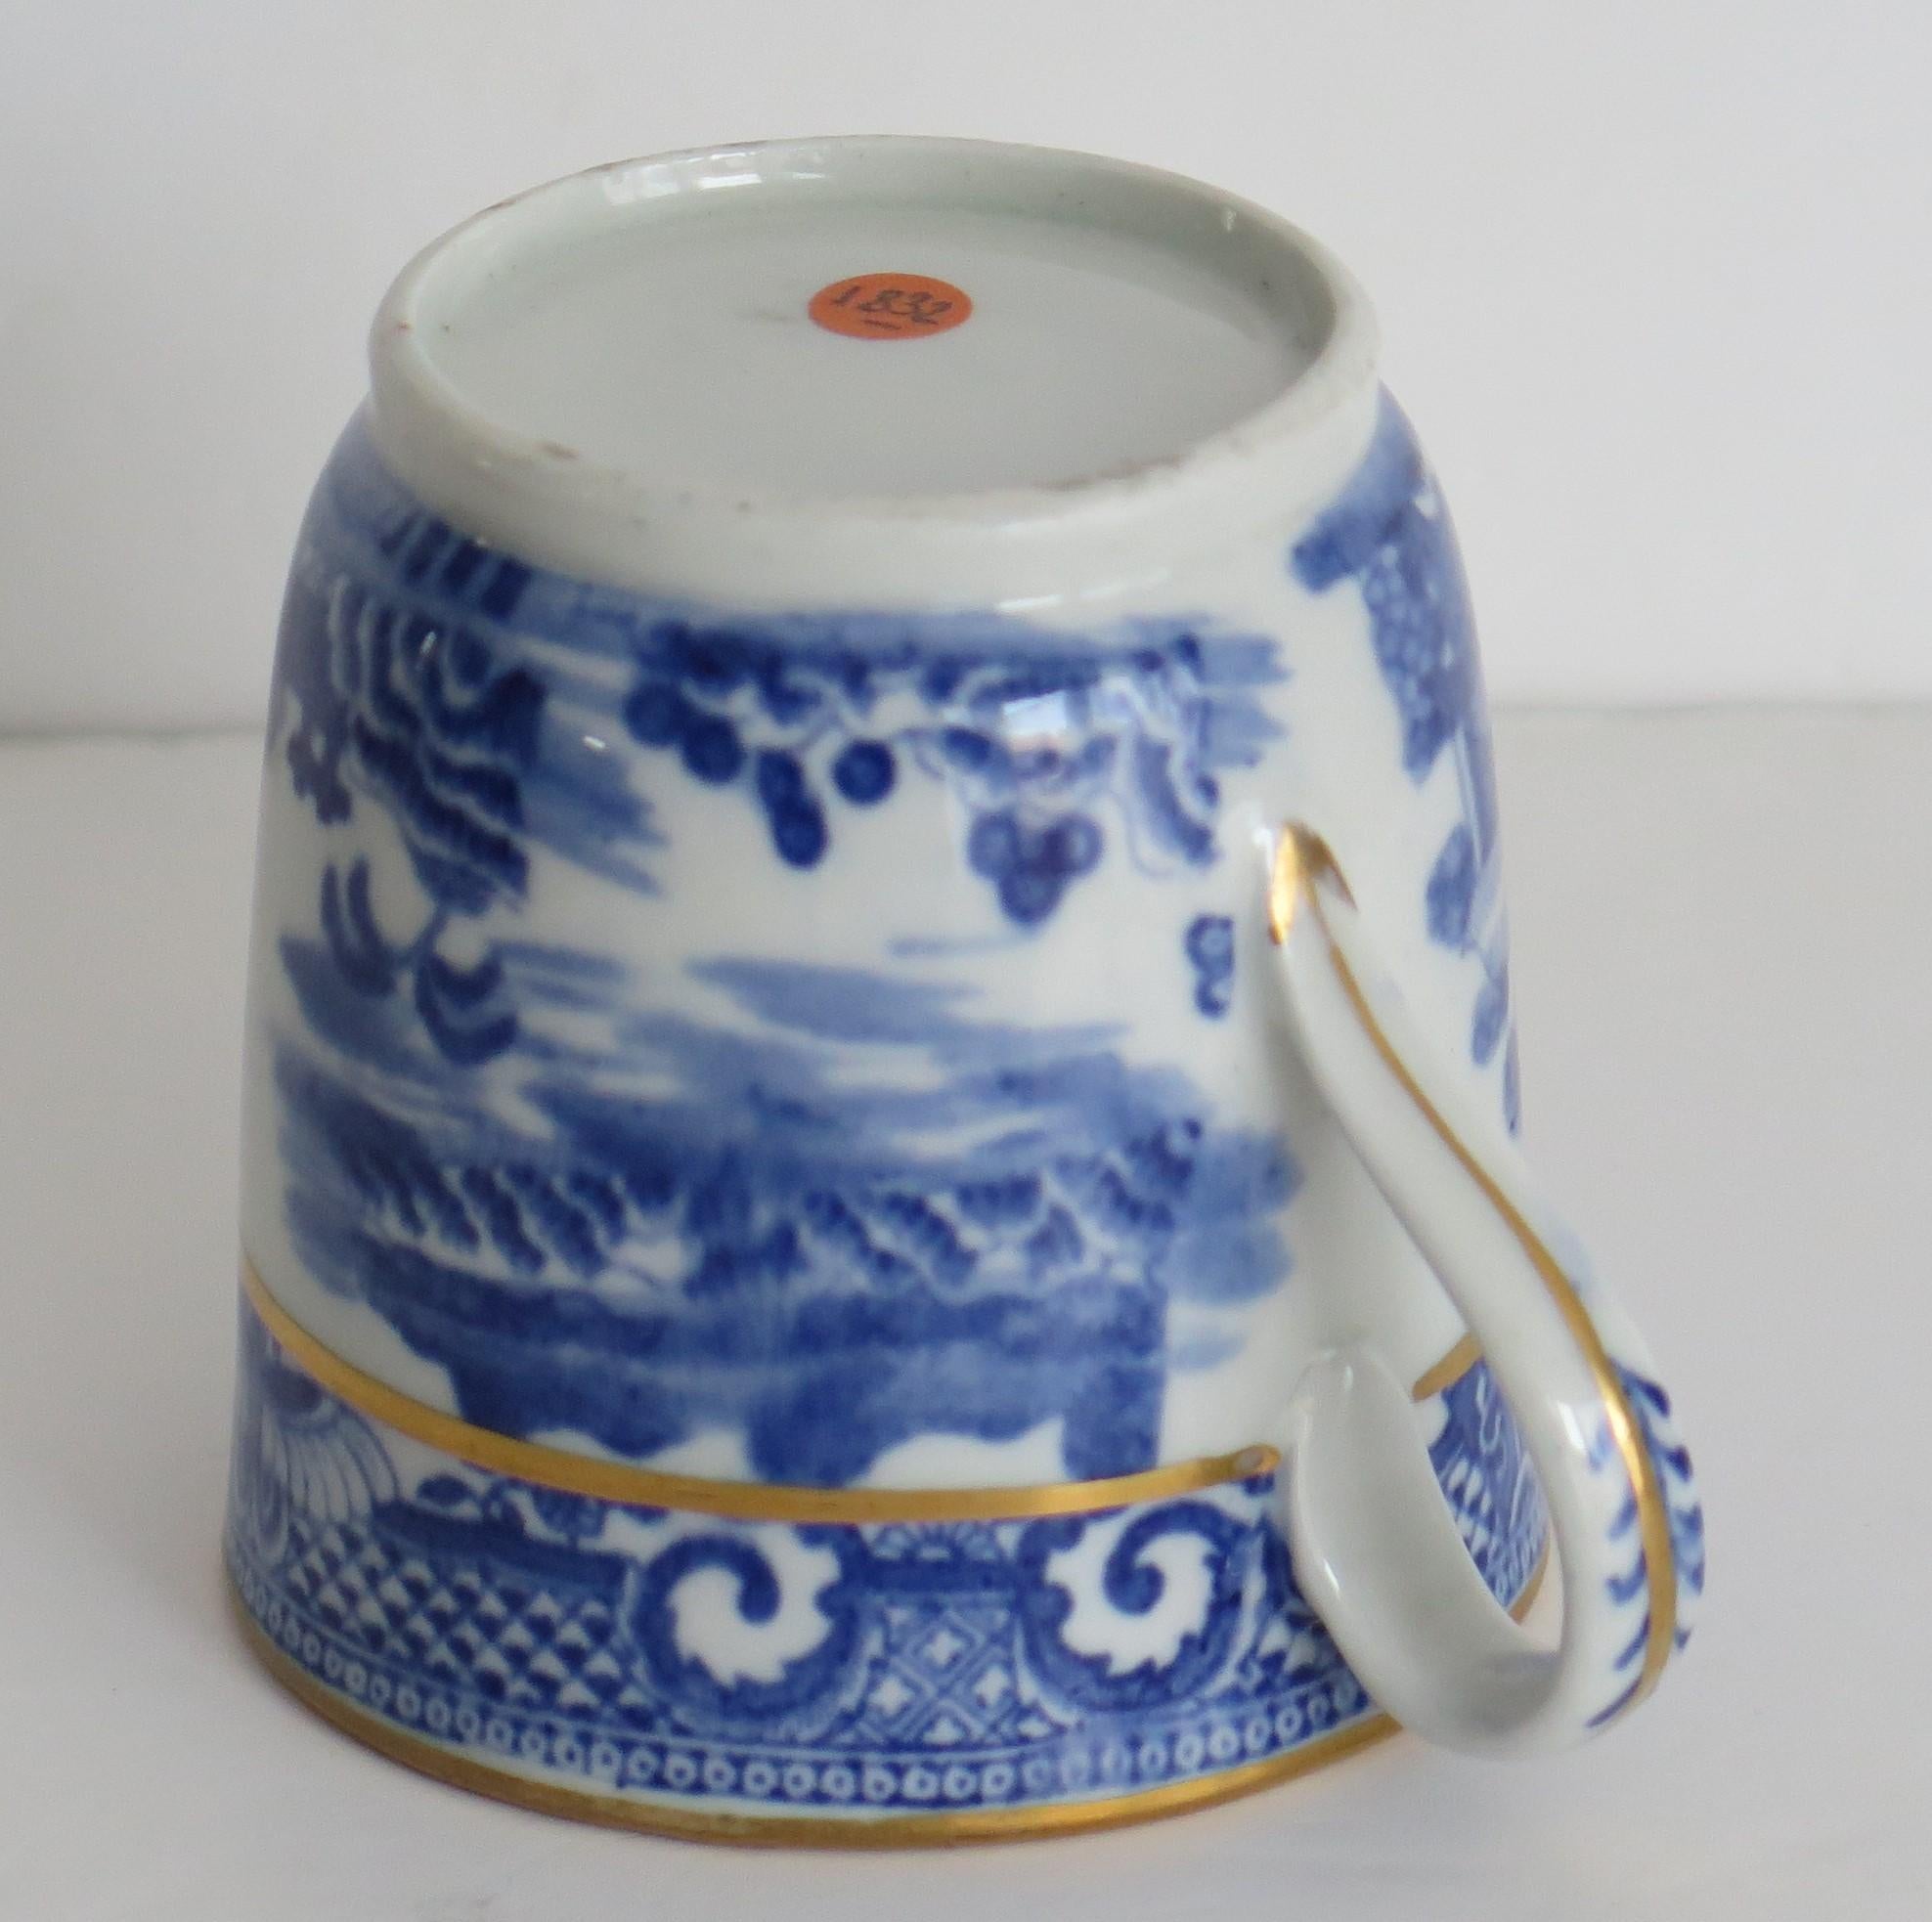 Newhall Porcelain Coffee Can Blue willow printed Ptn Ca 1805 3